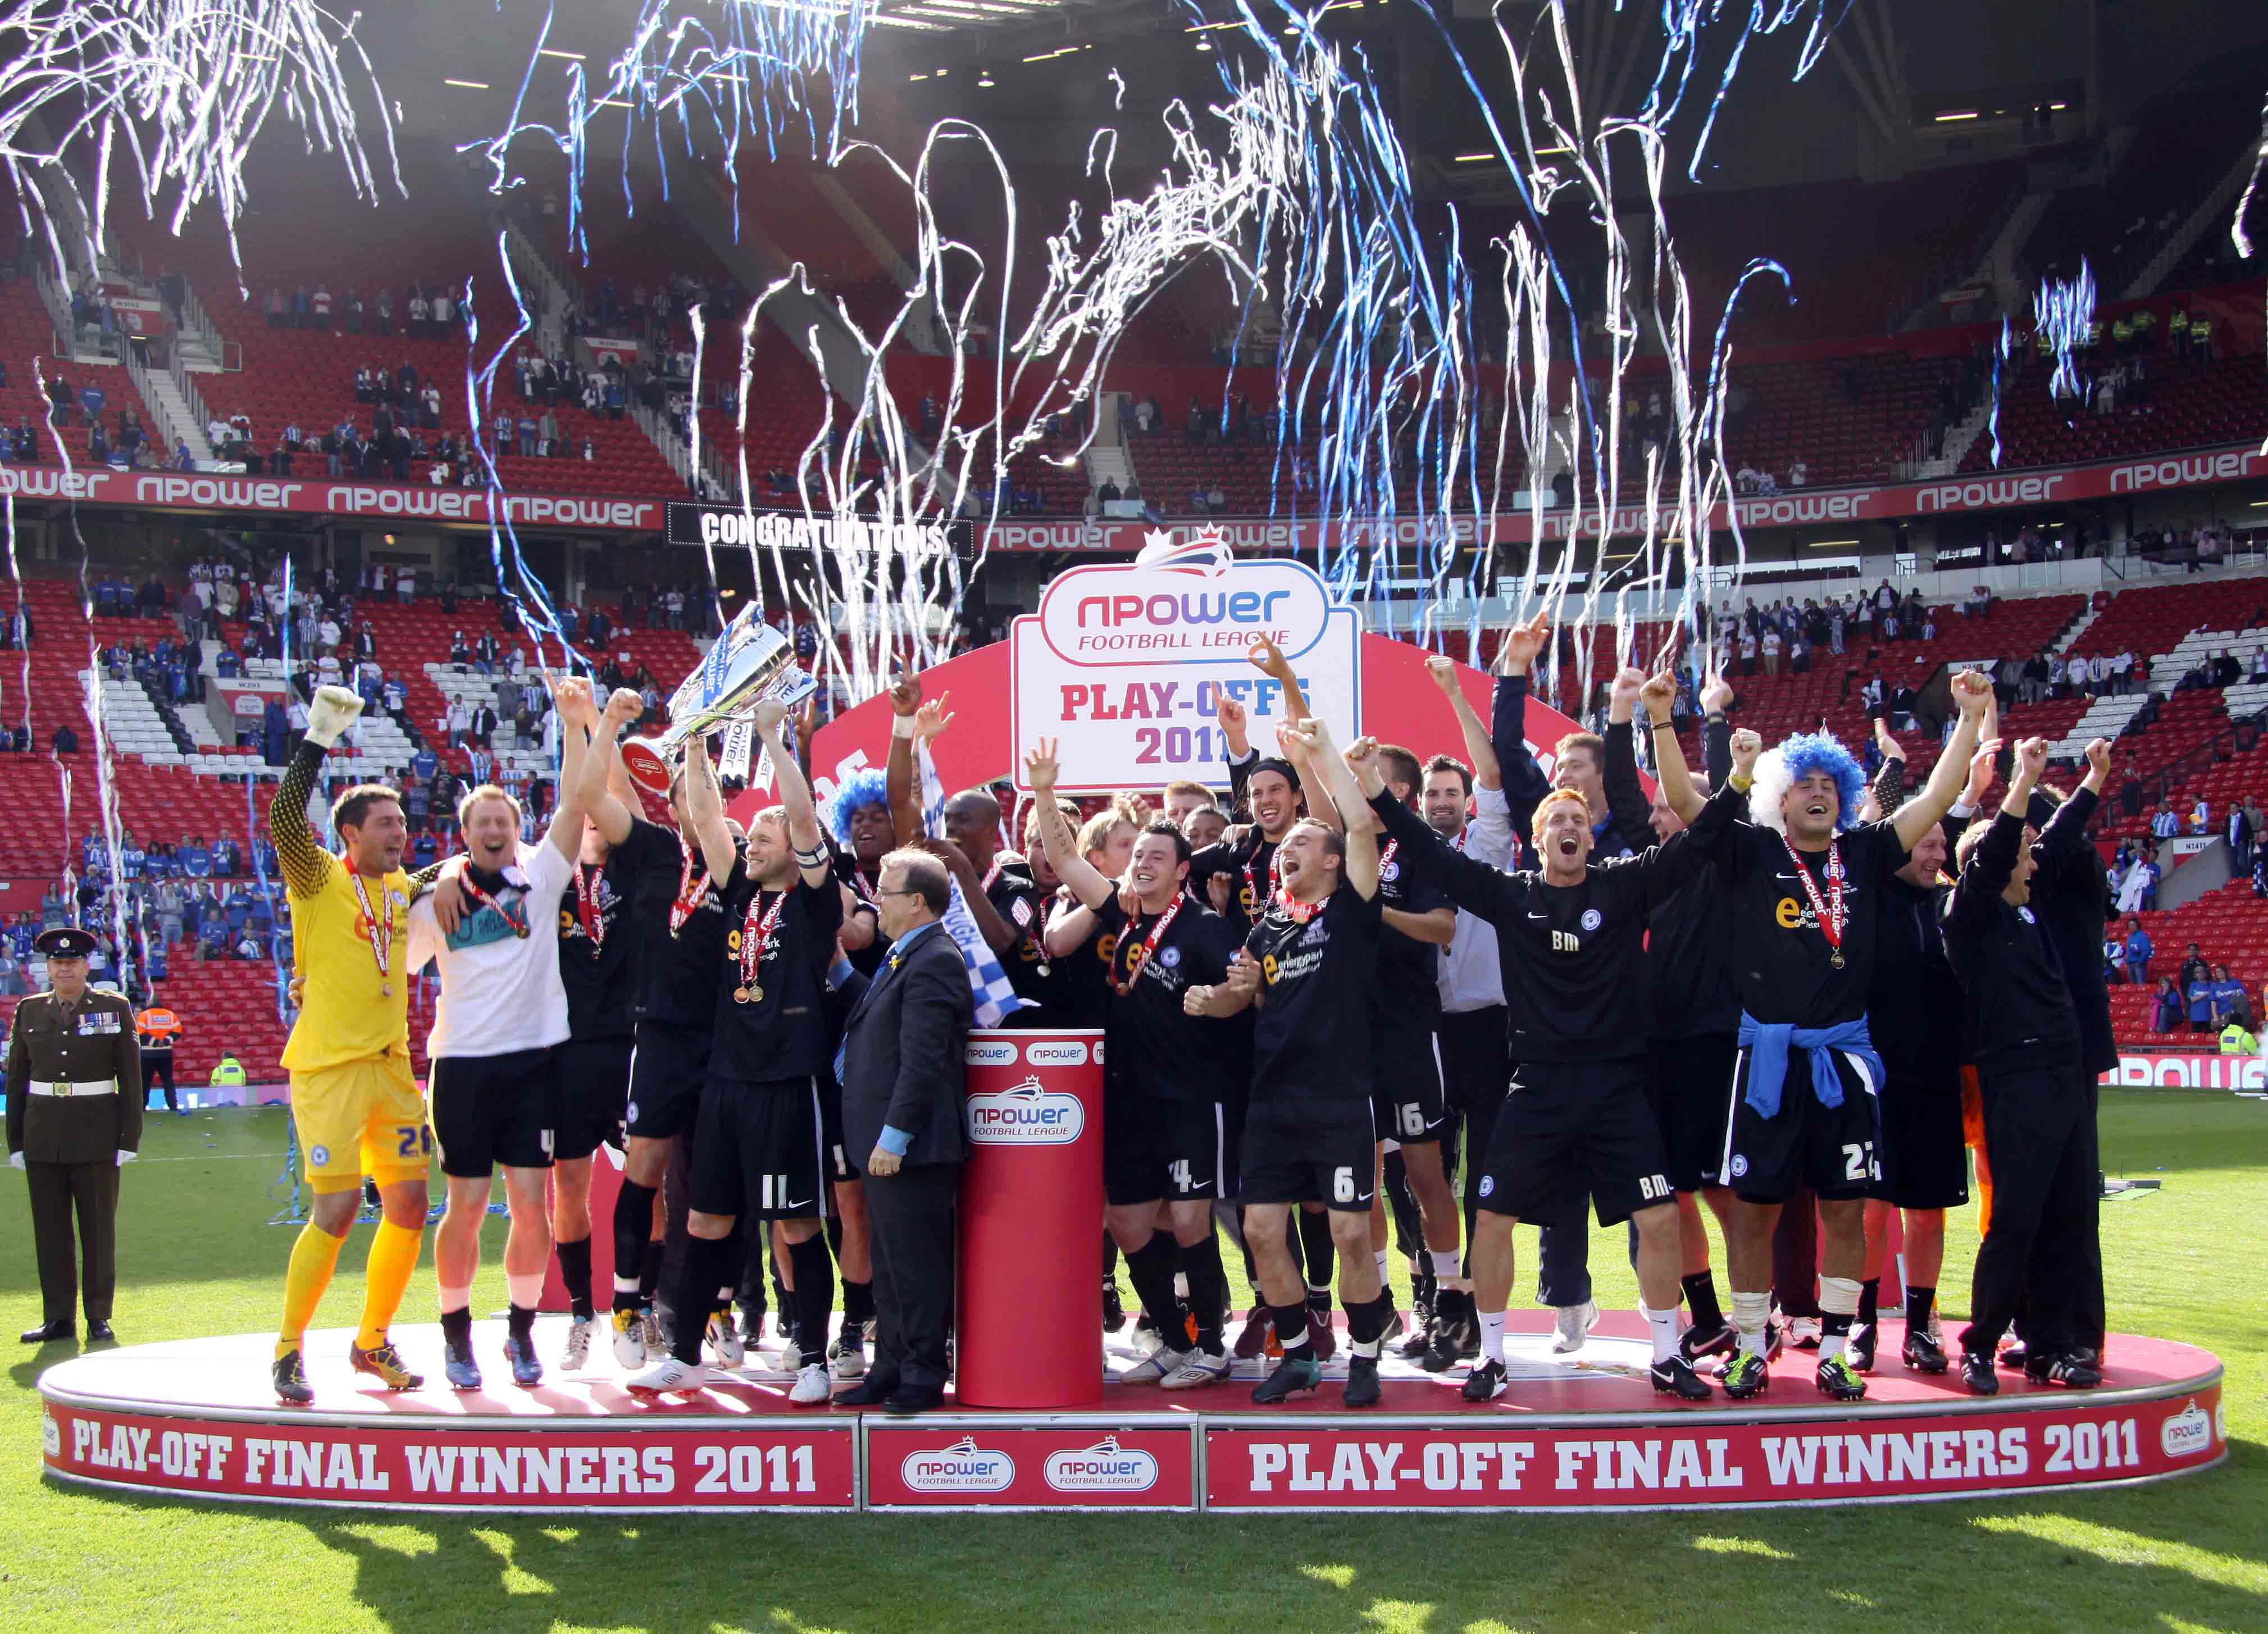 Posh celebrate winning promotion in the League One Play-Offs